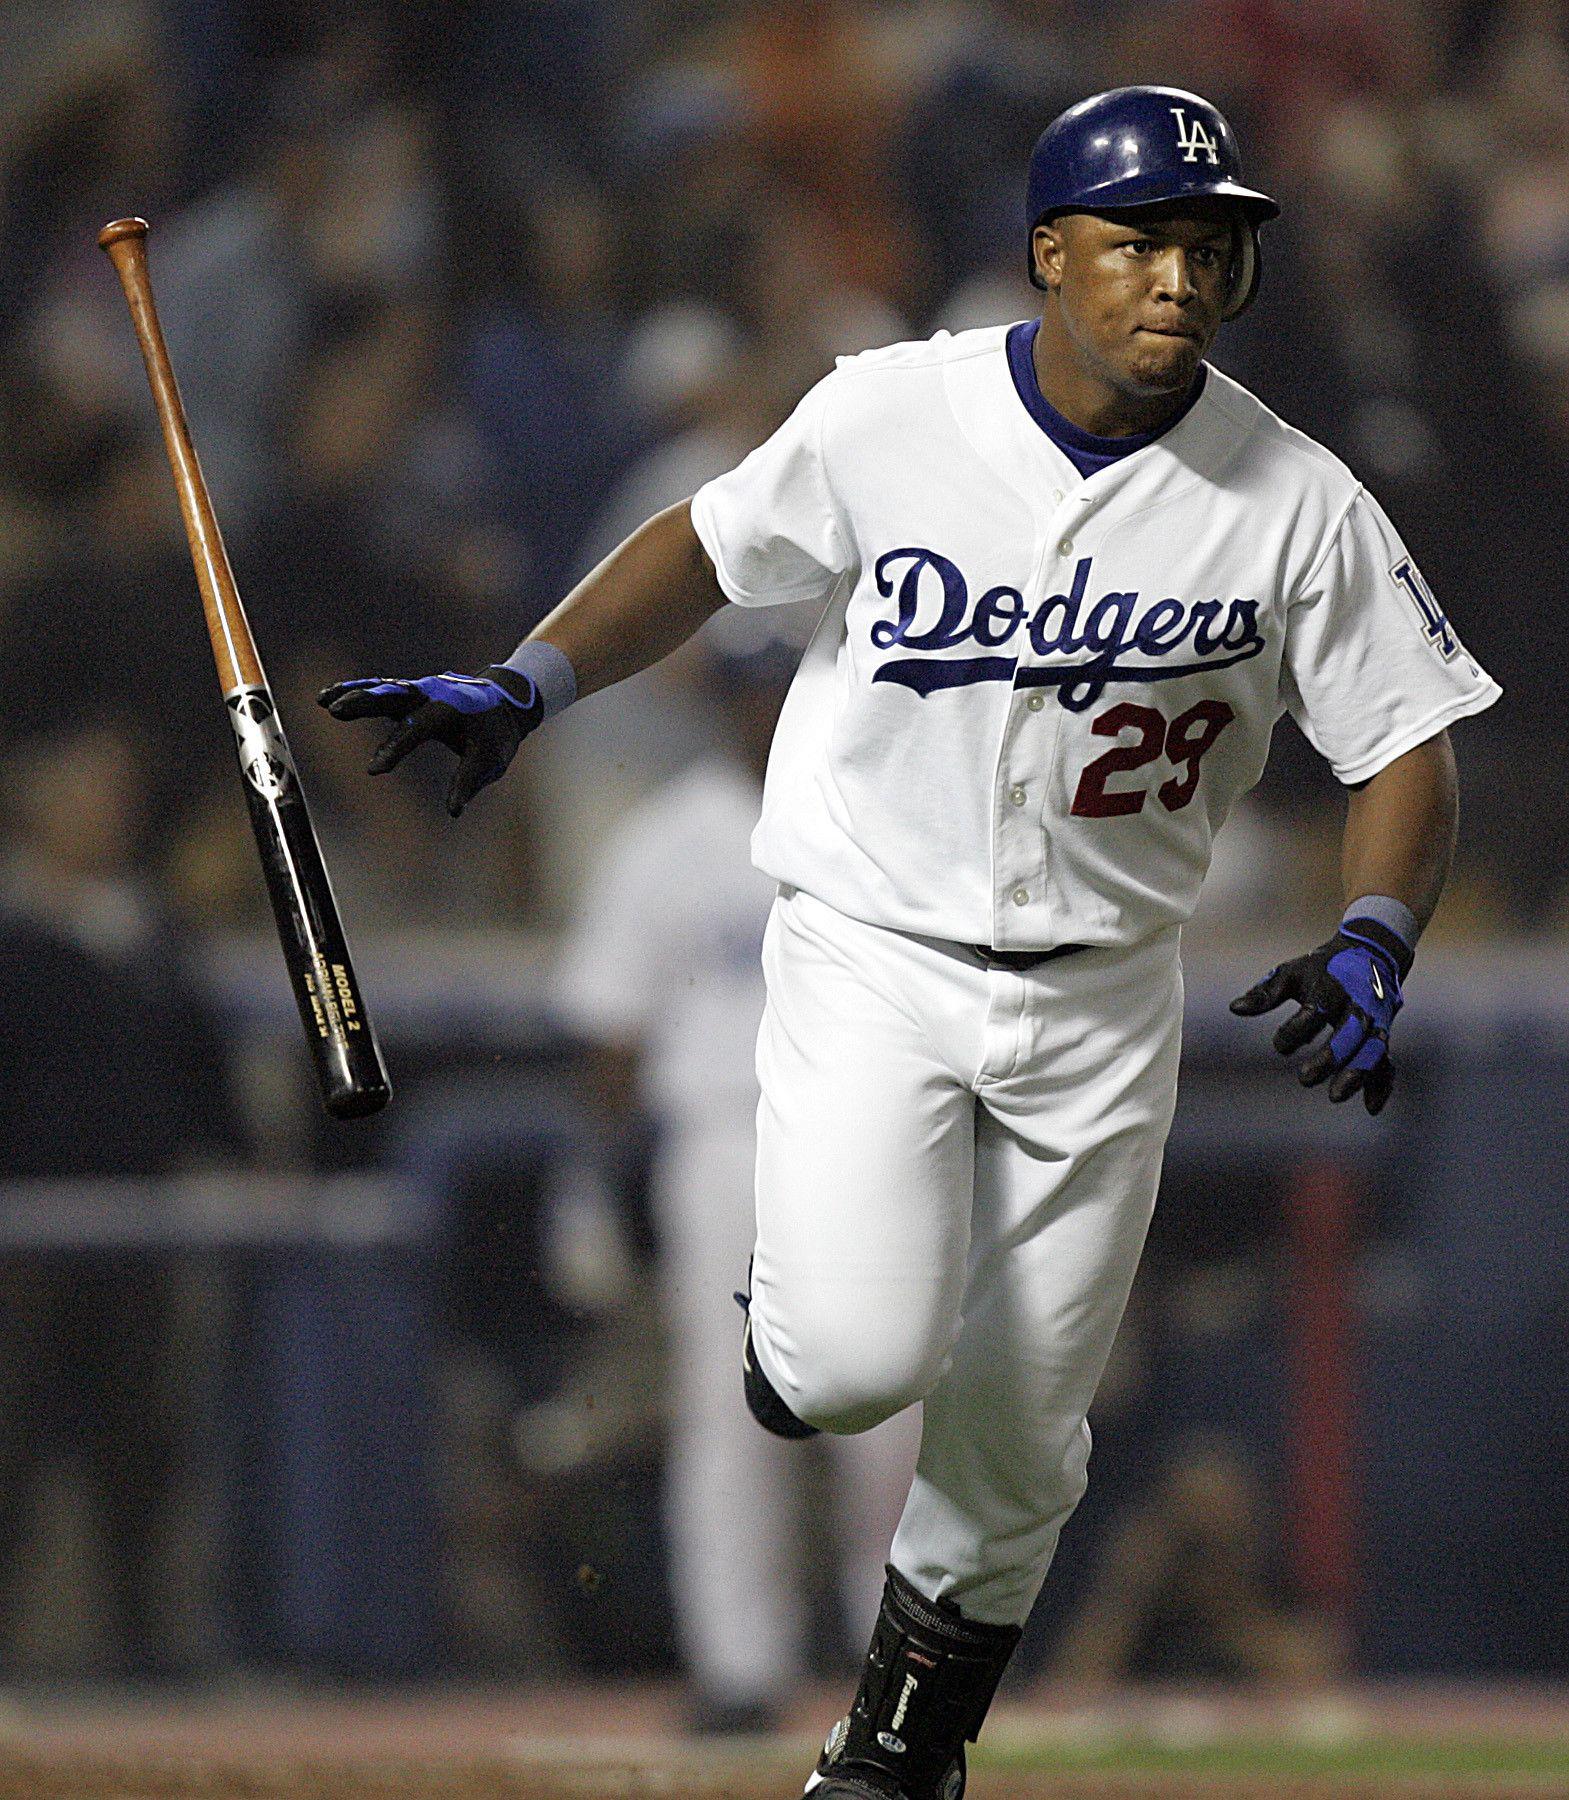 To Dodgers, Adrian Beltre is the Hall of Famer who got away